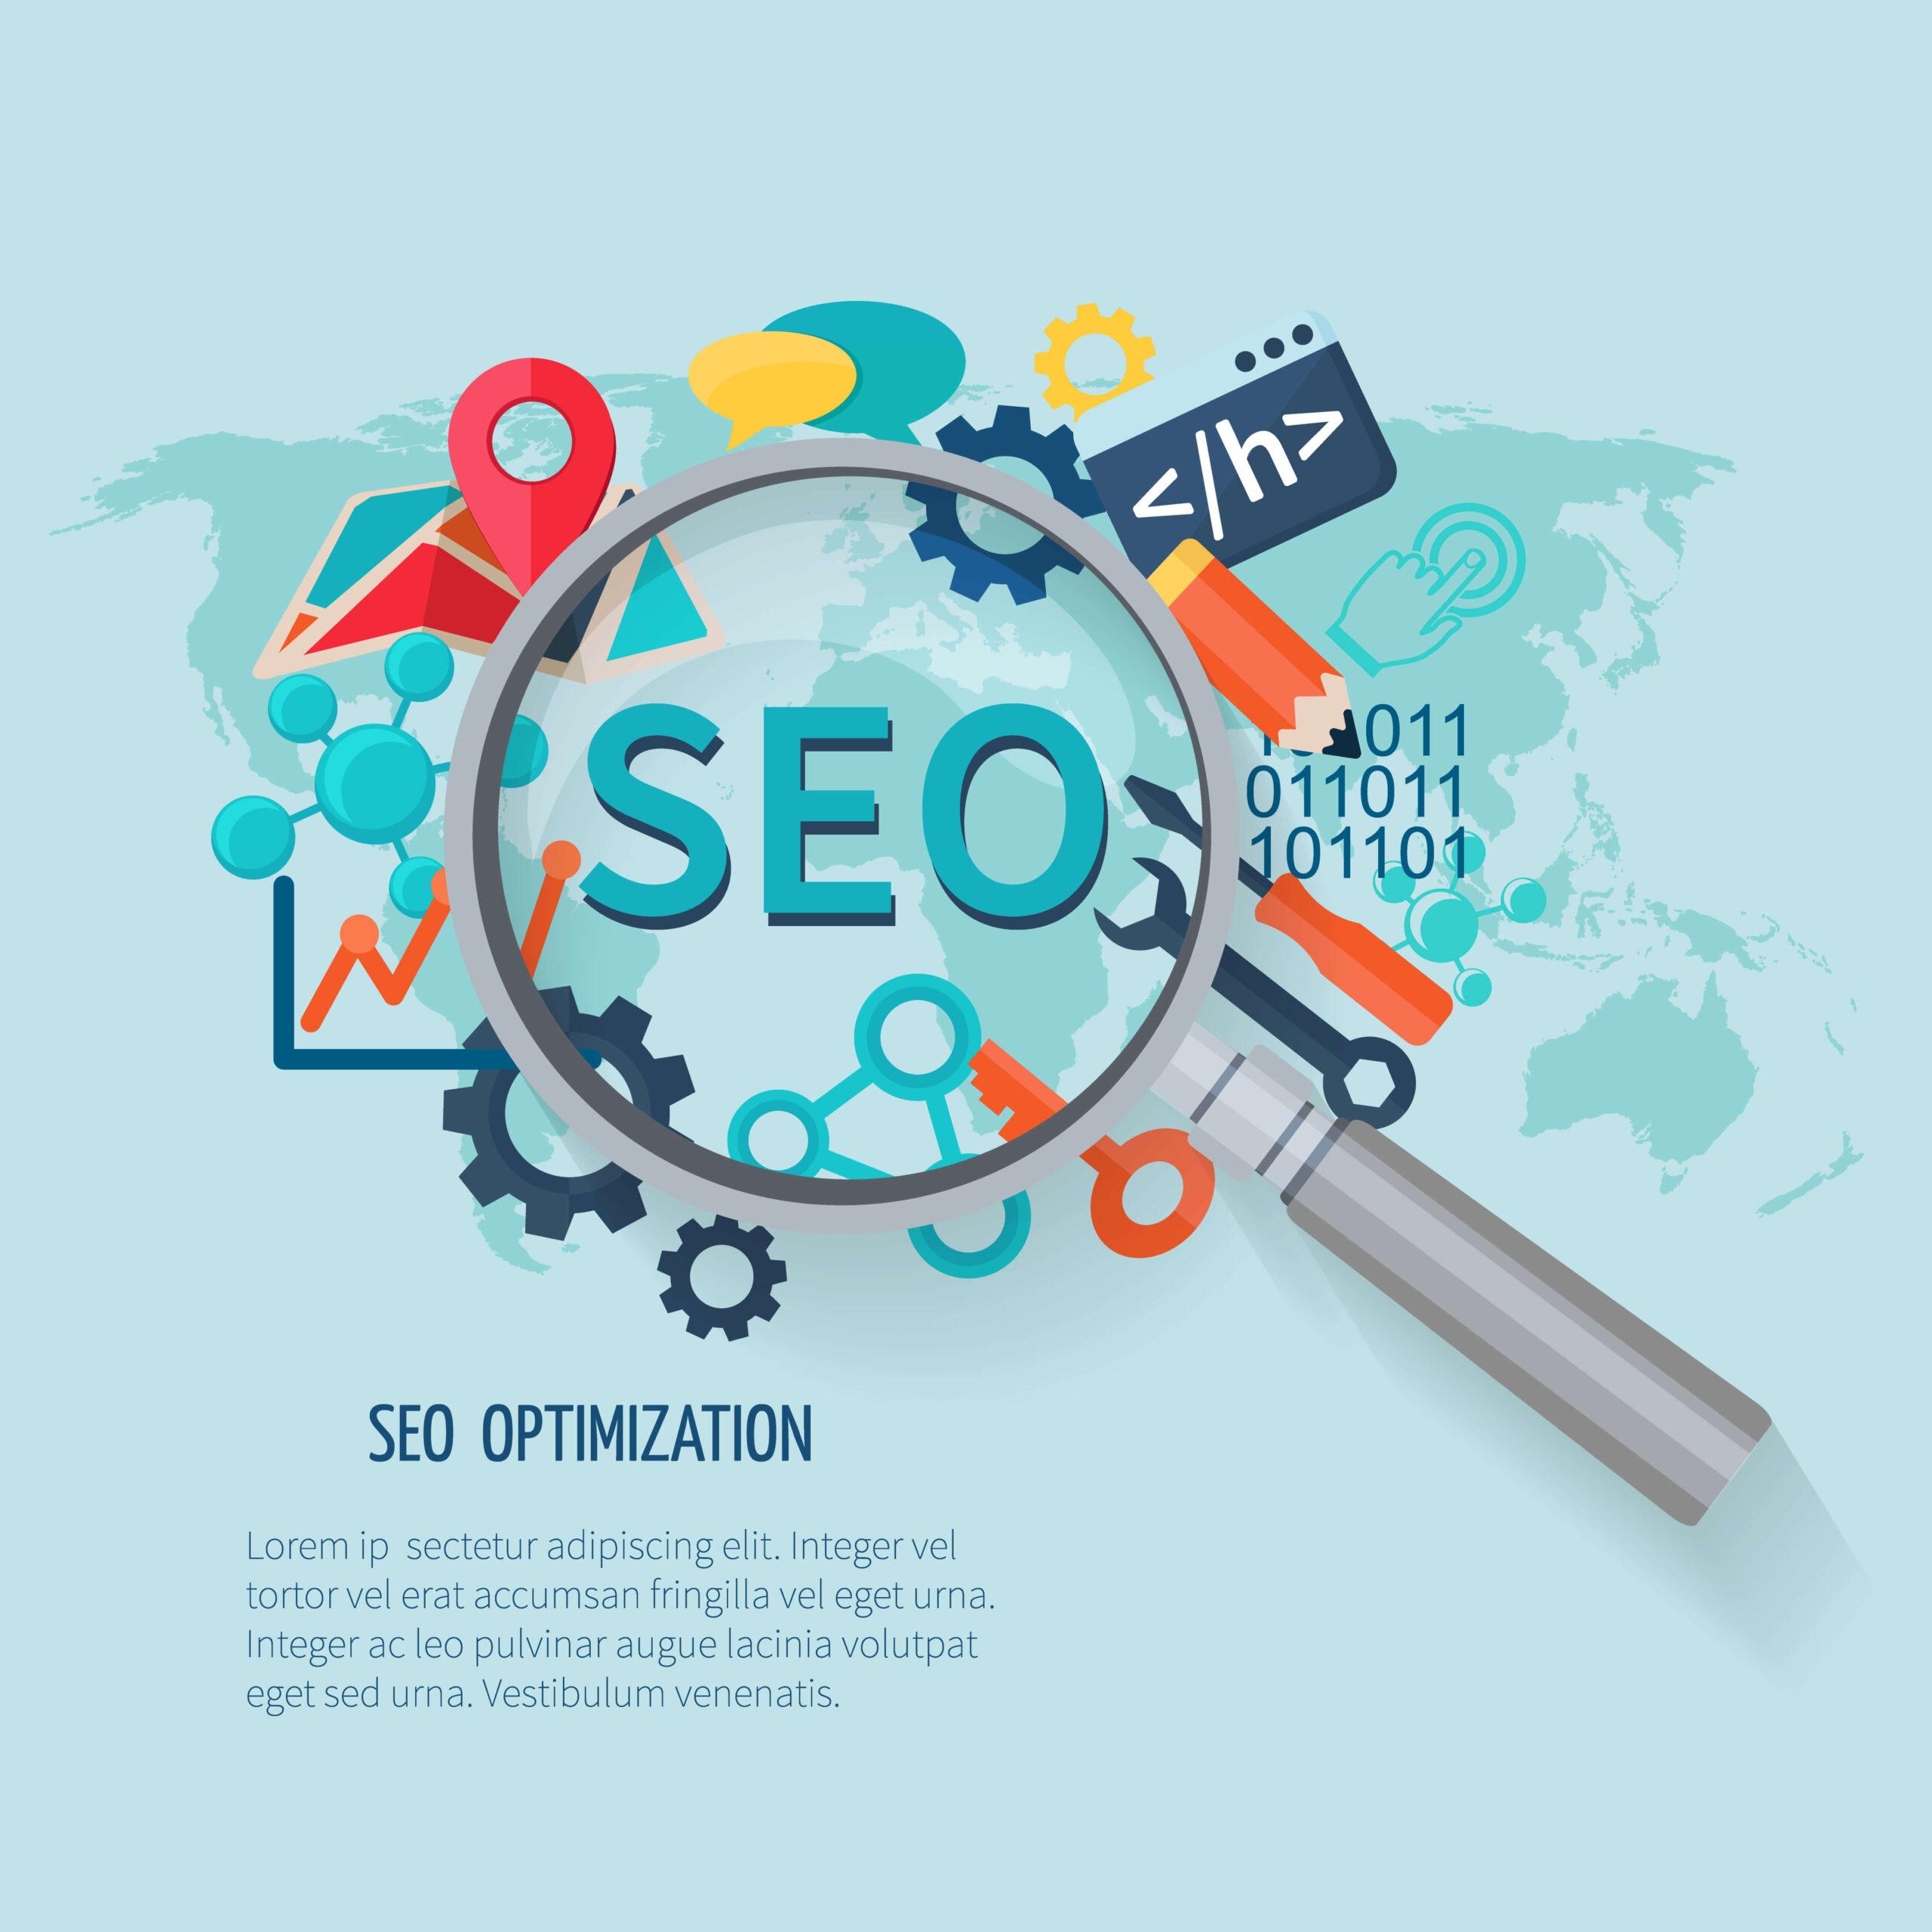 Seo marketing concept with research symbols world map and magnifier